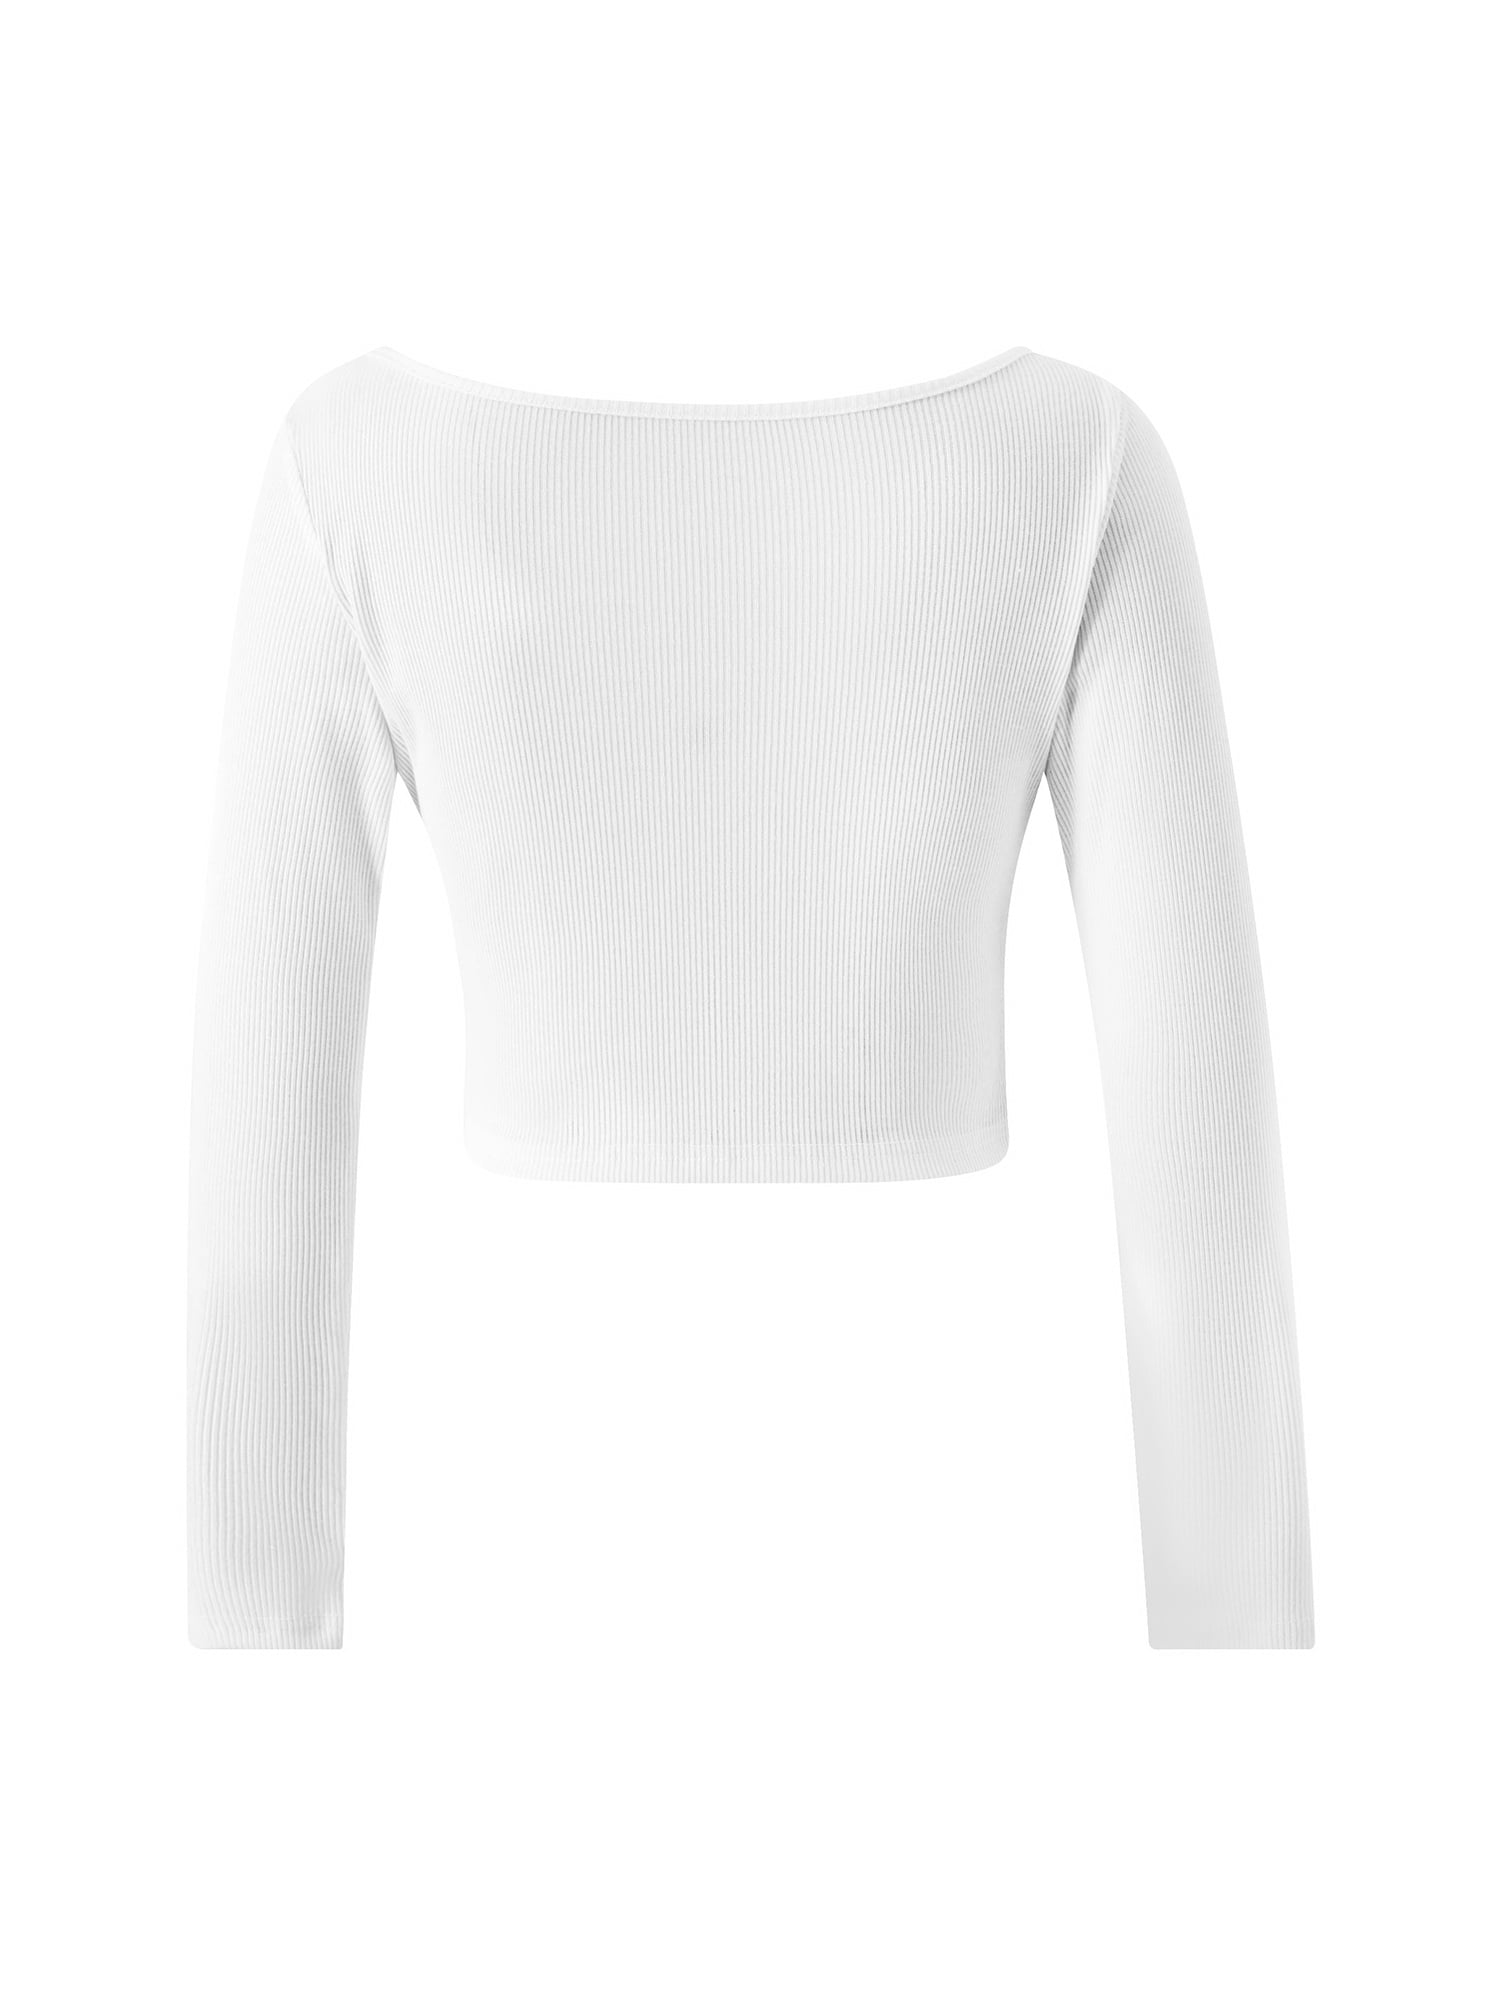 Women Crop Knitting Tops, Long Sleeve Square Neck Buttons Casual Street  Party Fall Shirt